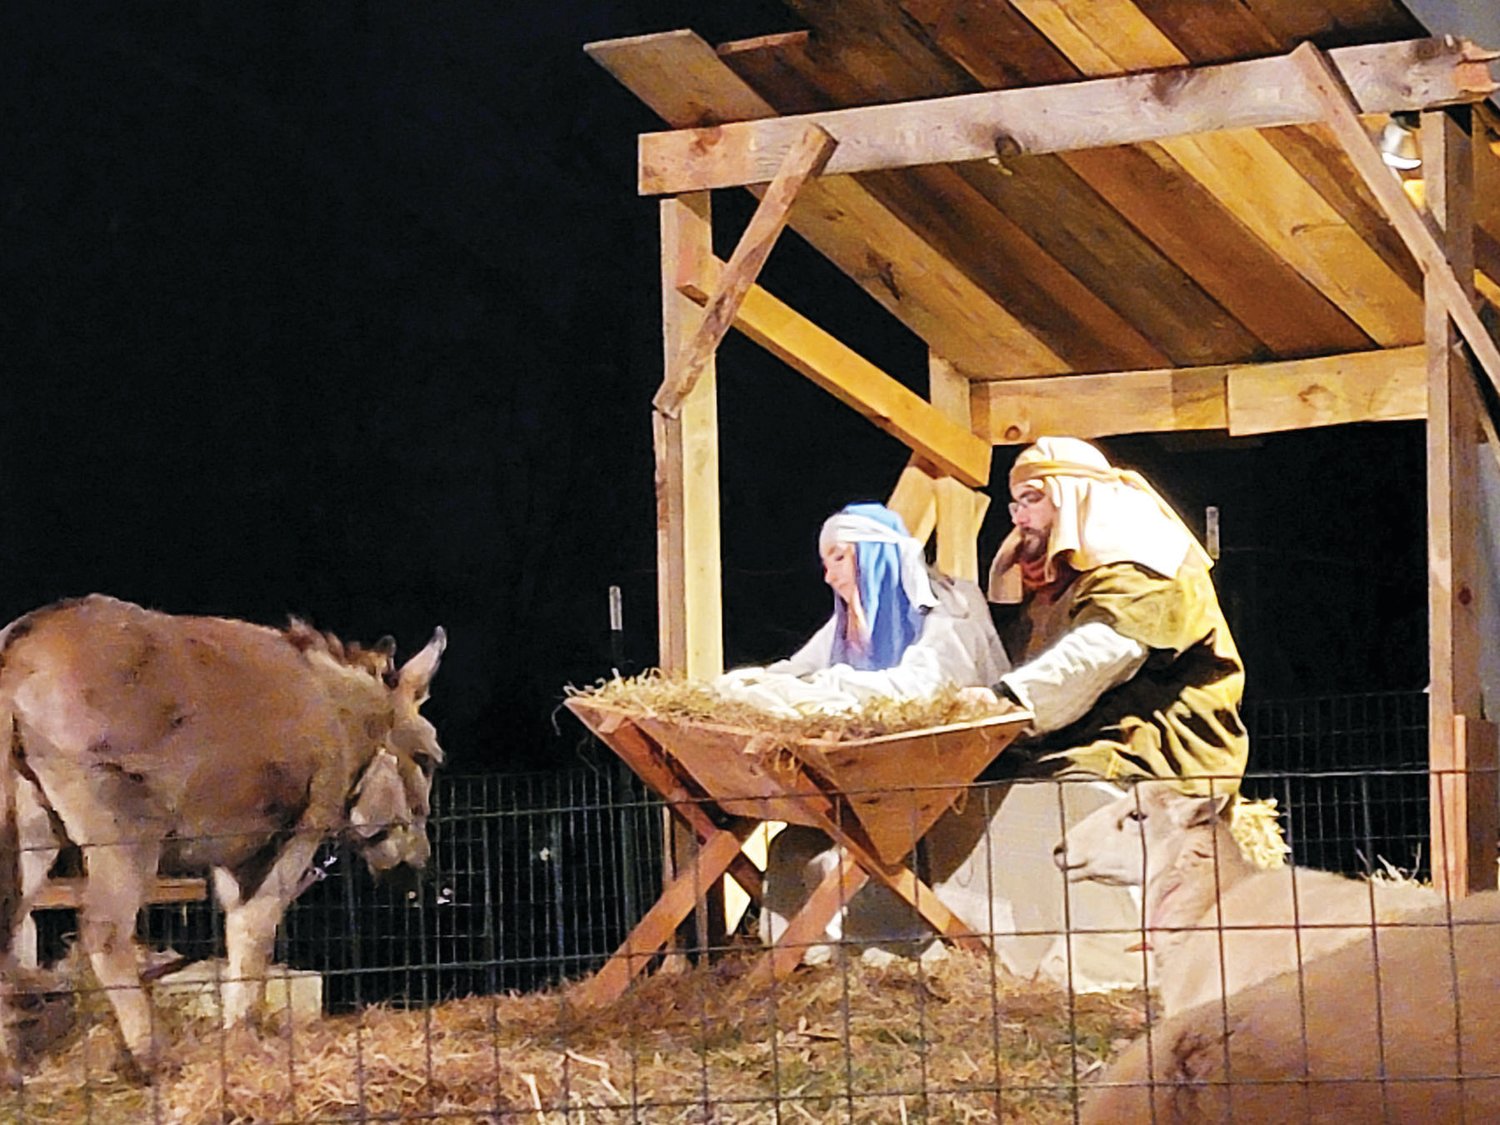 Living Hope Community Church in Dublin presented its Living Nativity, an outdoor walk-through presentation about the birth of Christ, Dec. 16 to 19.